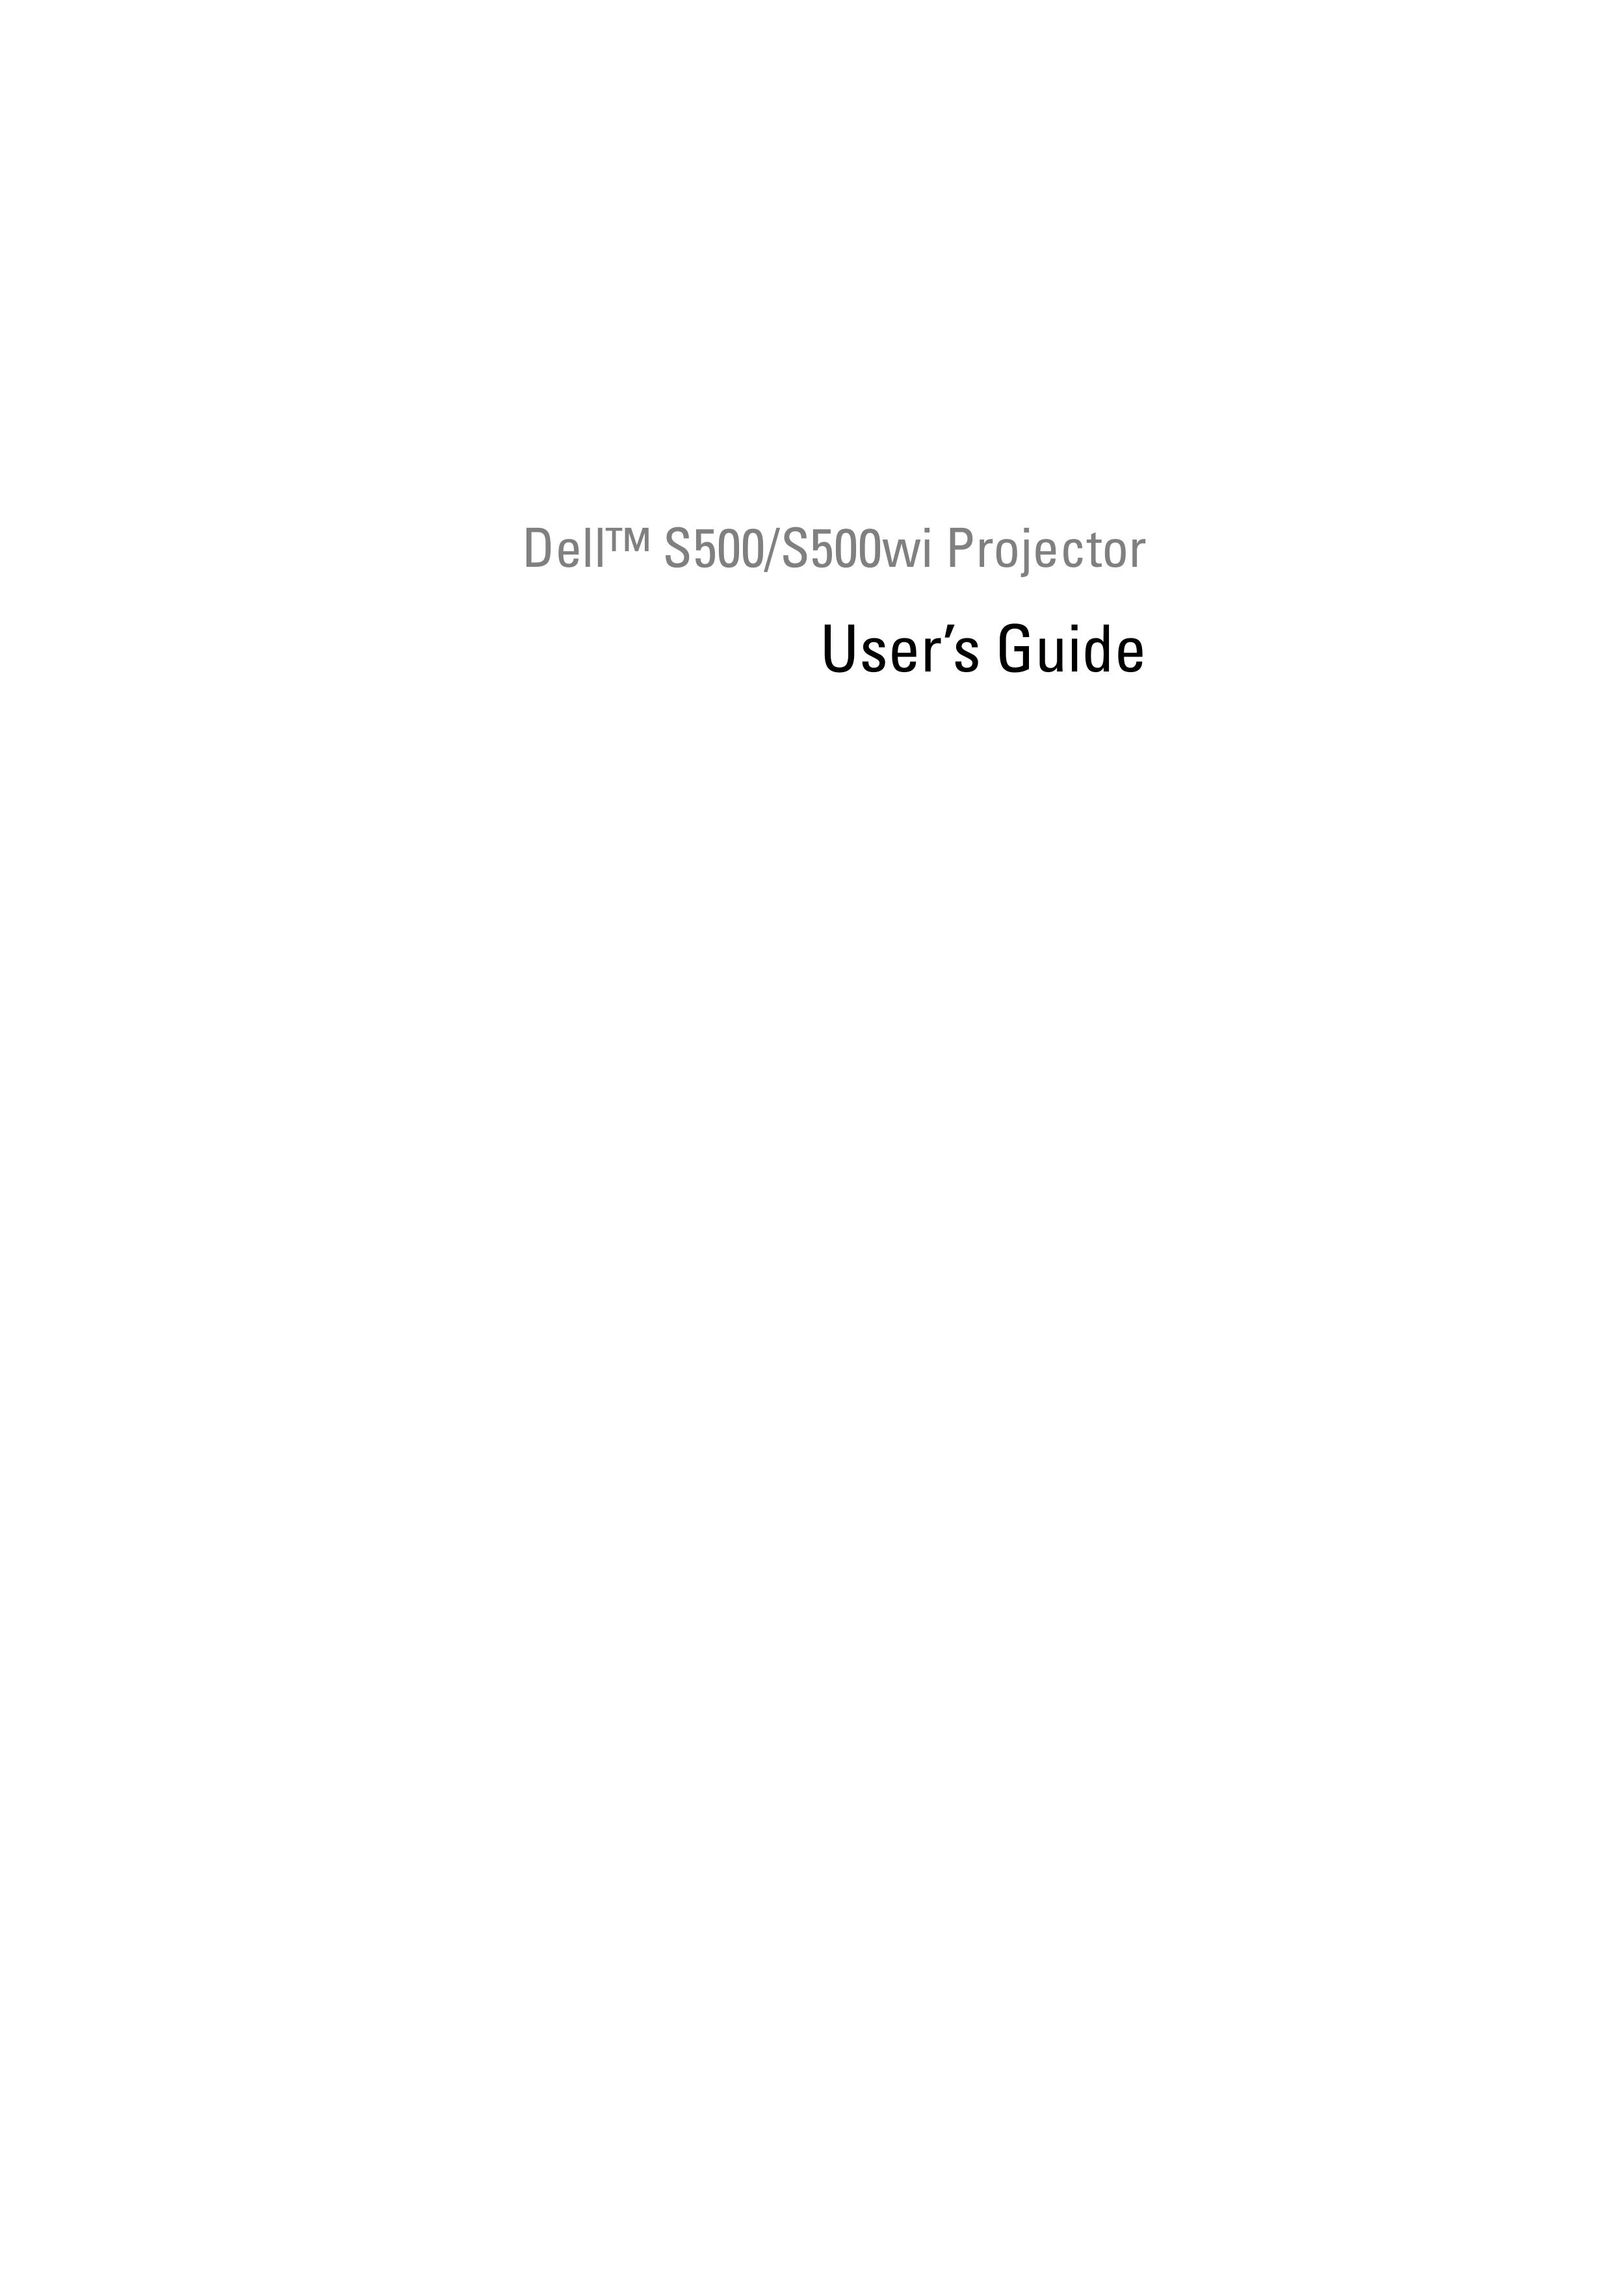 Dell S500 Projector User Manual